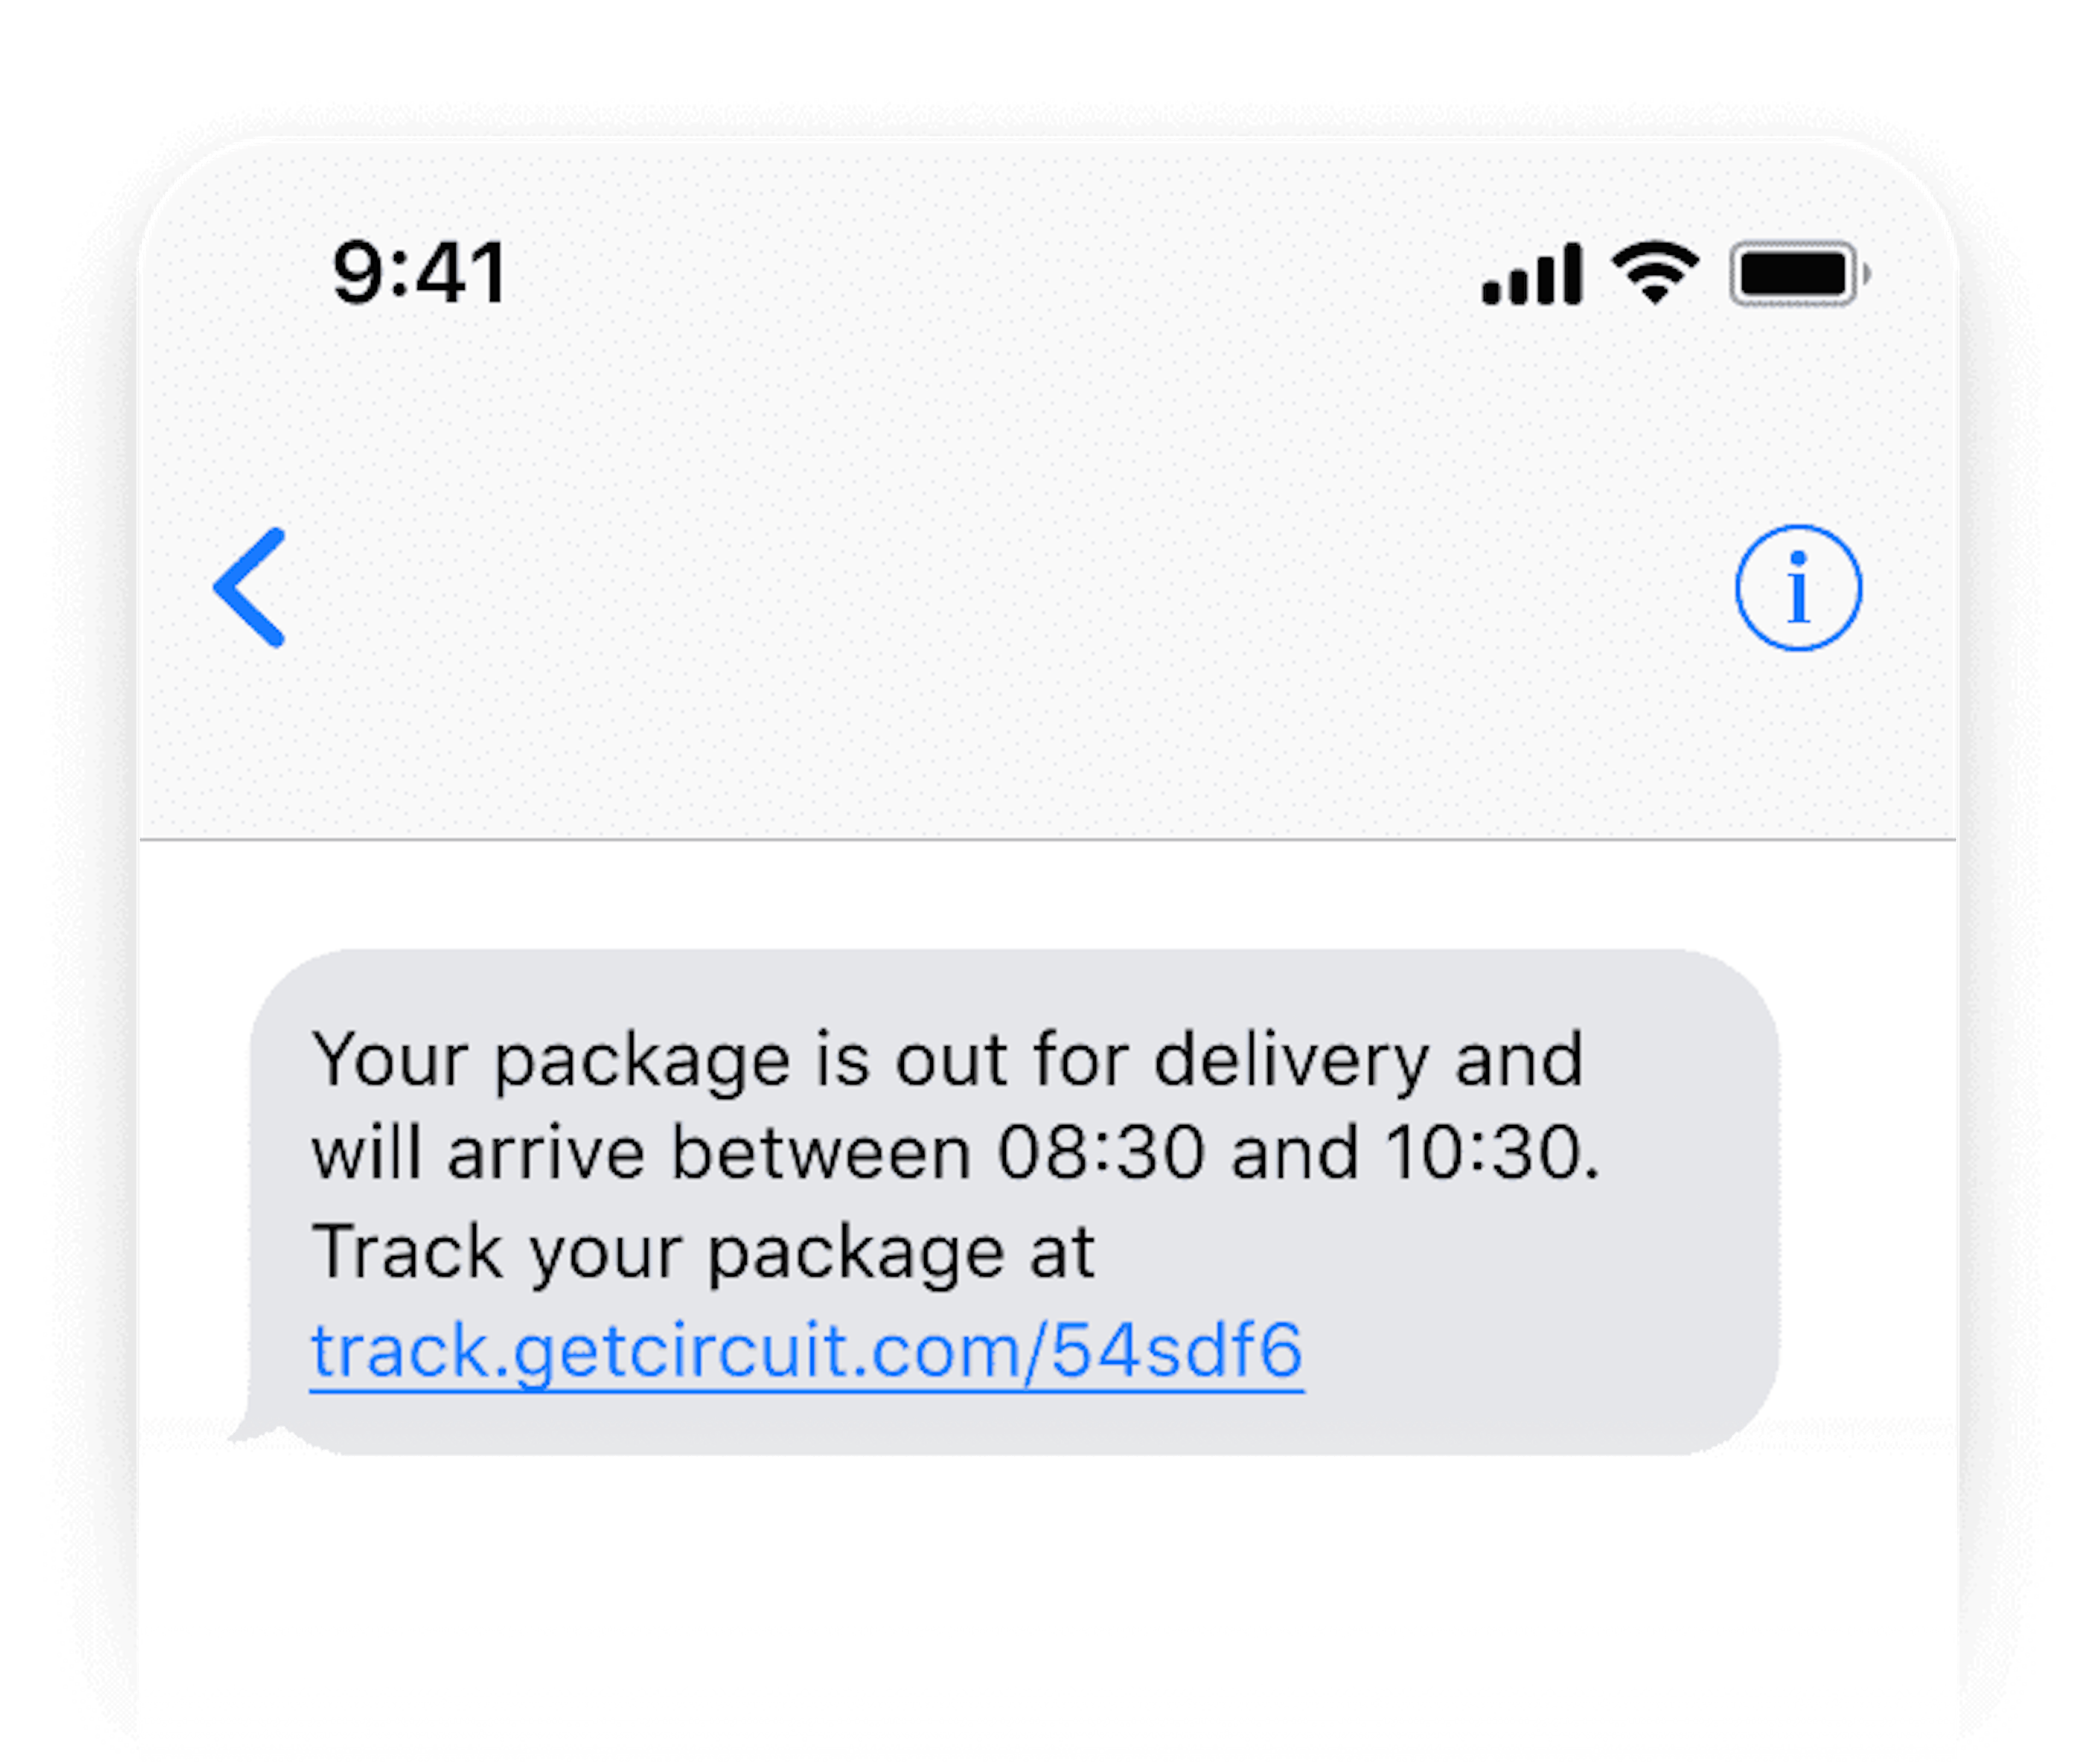 Delivery notification text message example: &quot;Your package is out for delivery and will arrive between 08:30 and 10:30. Track your package here.&quot;